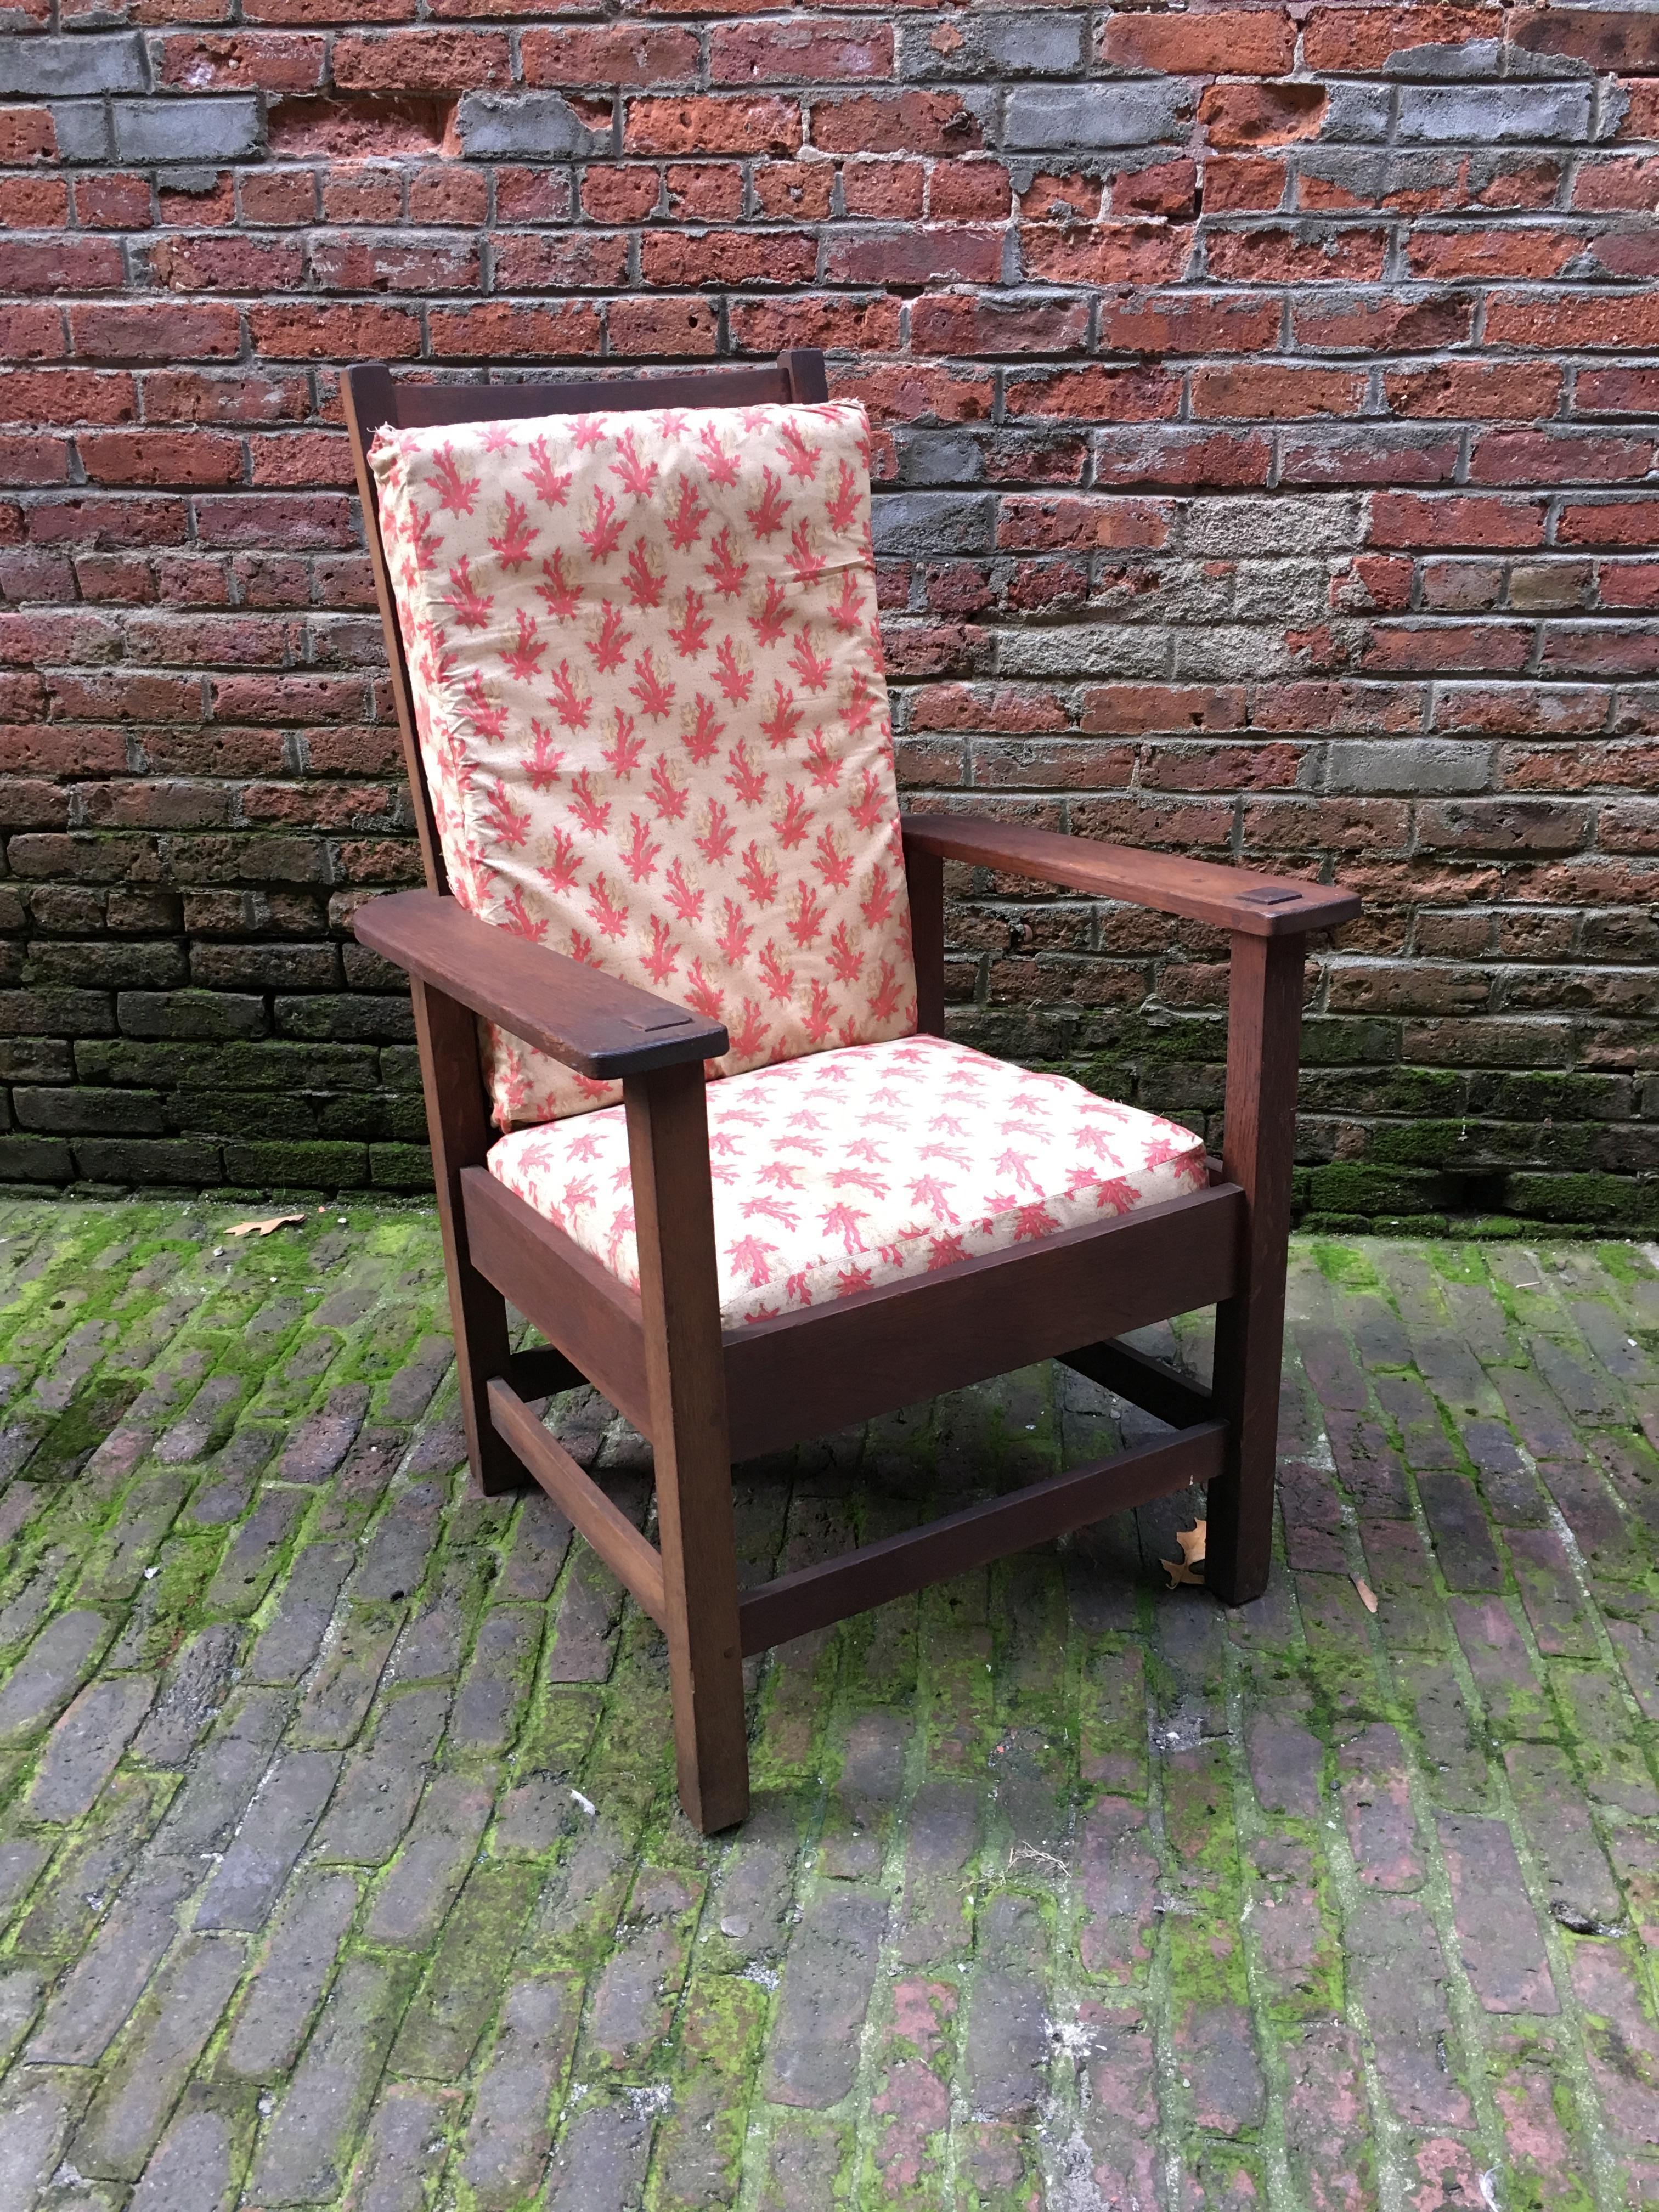 Solid oak slat back Stickley Brothers armchair. Fully signed with metal Quaint Furniture, Stickley Brothers, Grand Rapids, Michigan tag, circa 1920. Good condition with overall wear and some chips to the rear legs (see photos). Original seat slats